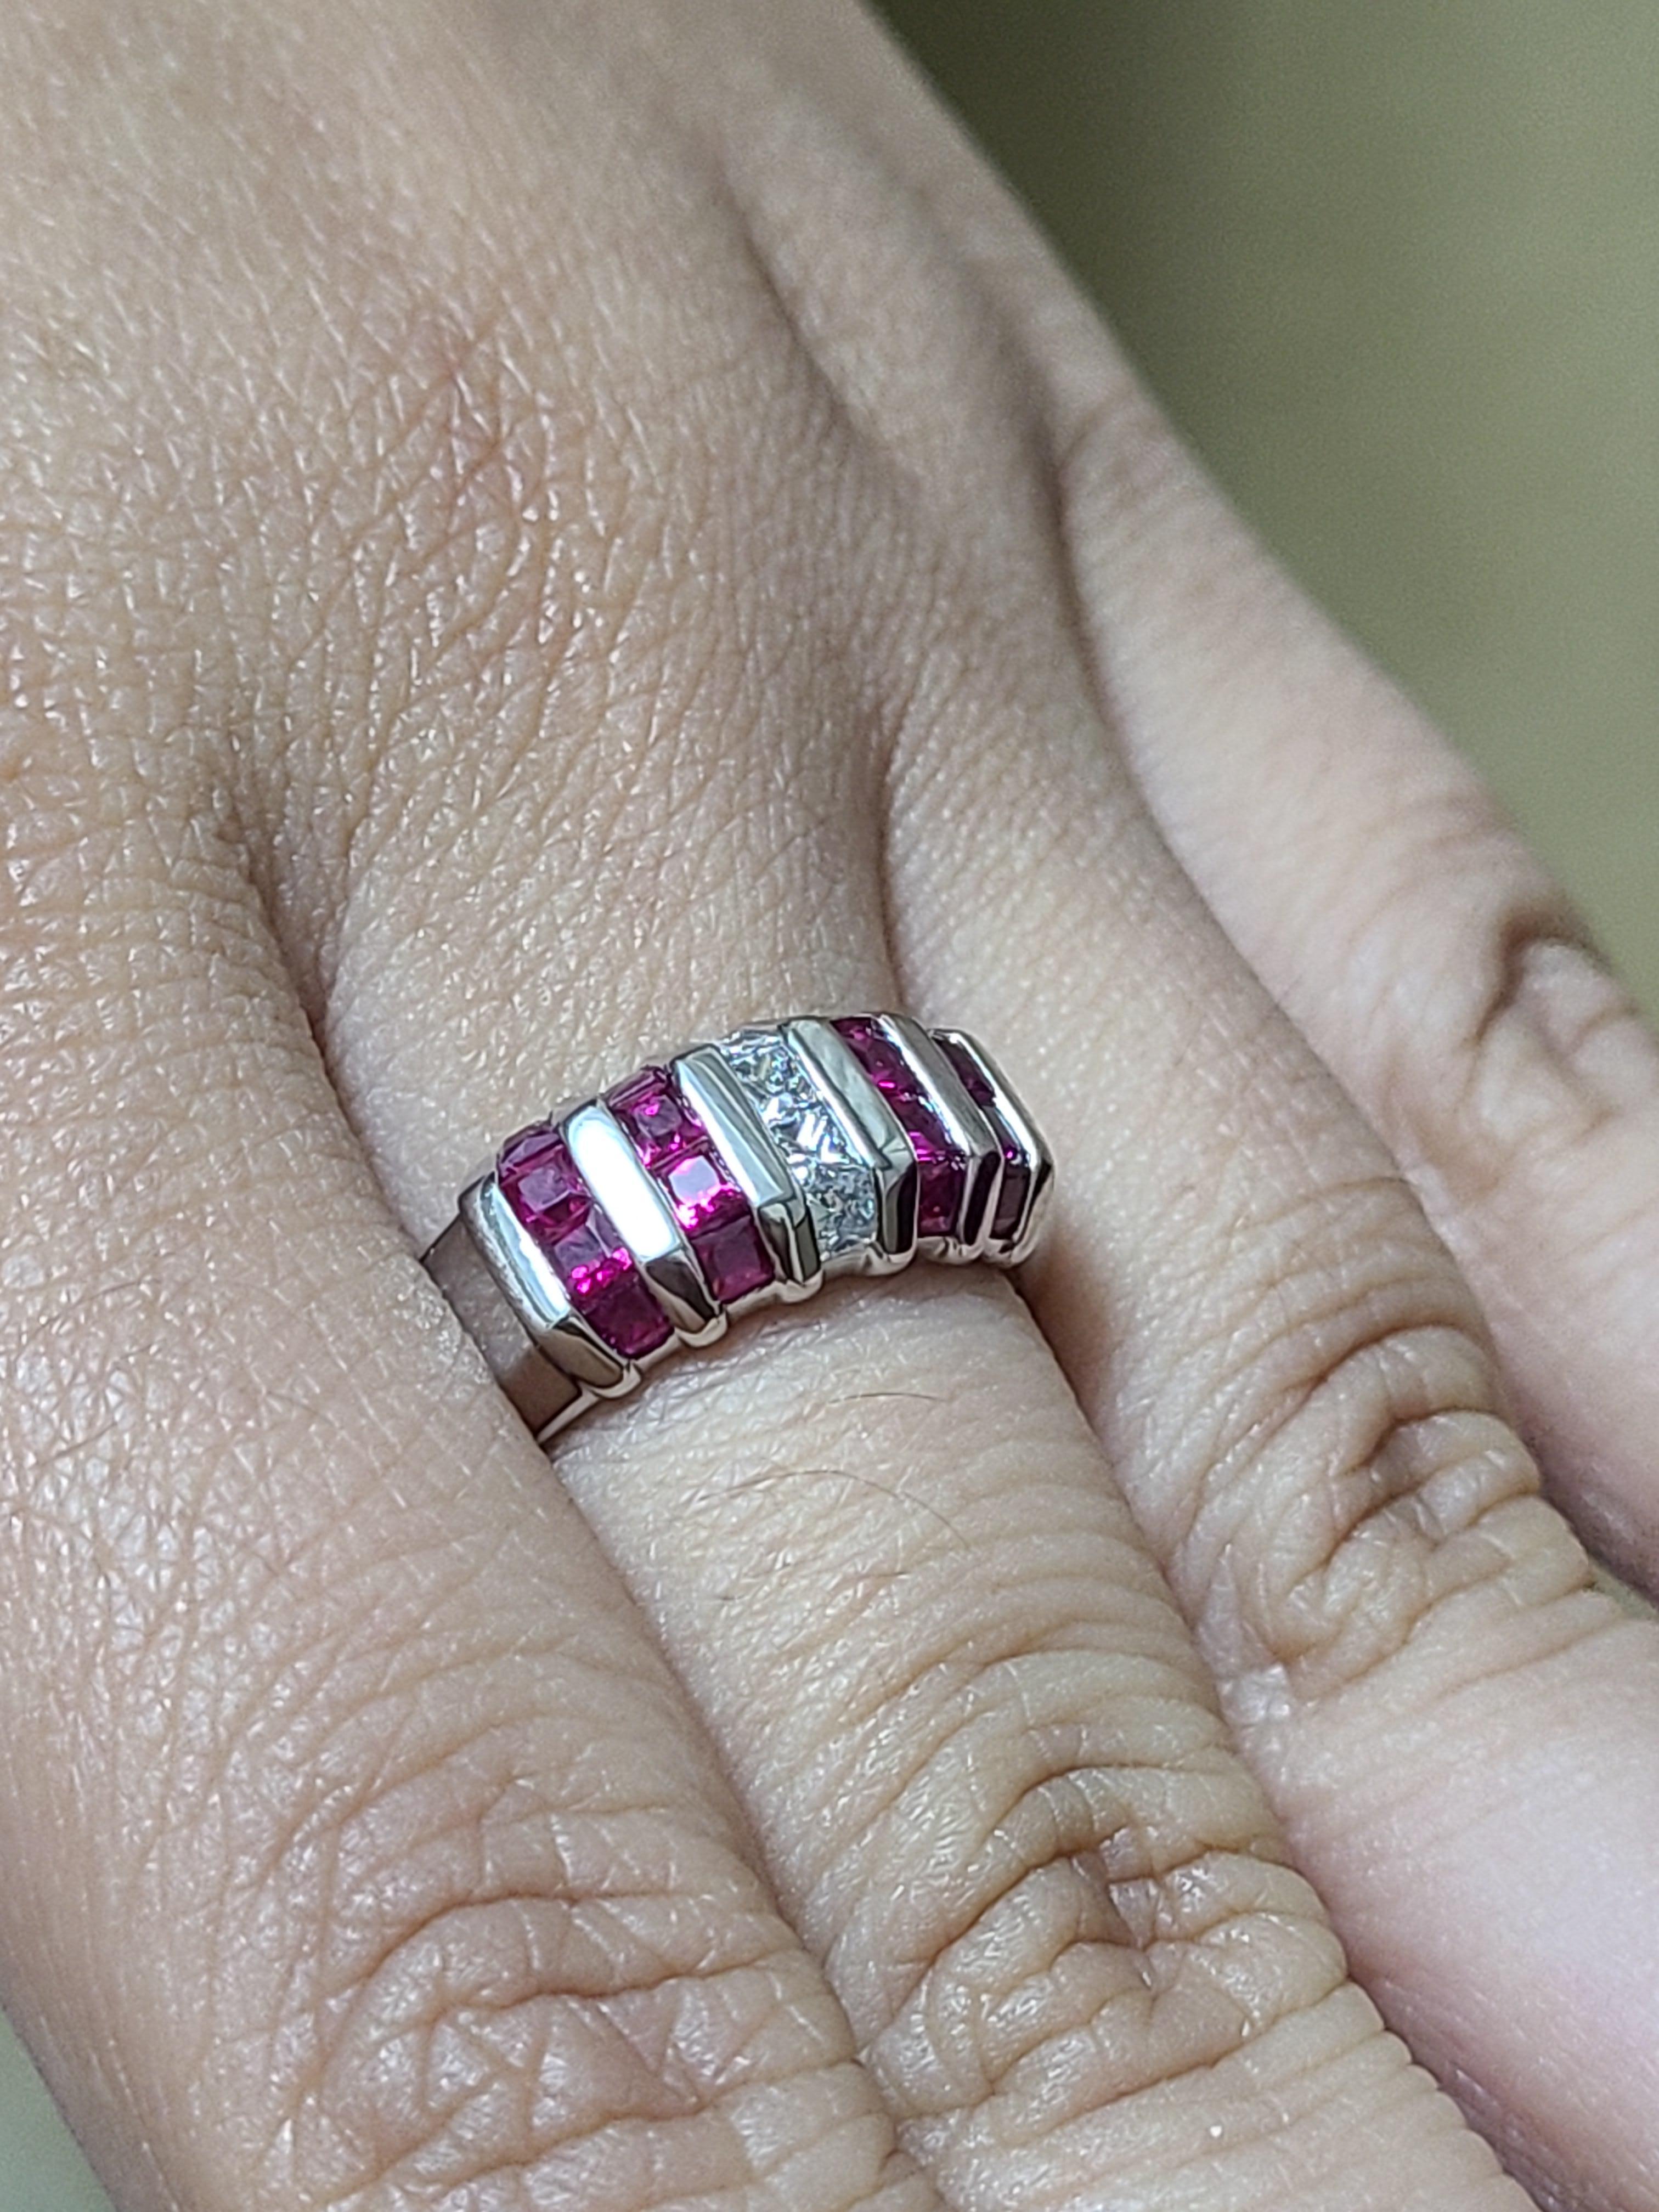 A gorgeous and Chic ruby band ring set in Platinum PT900 with diamonds . The ruby weight is 1.11 carats and diamond weight is .24 carats. The ring dimension in cm .7 x 1.8 x 2 (LXWXH). US size 6 1/2.